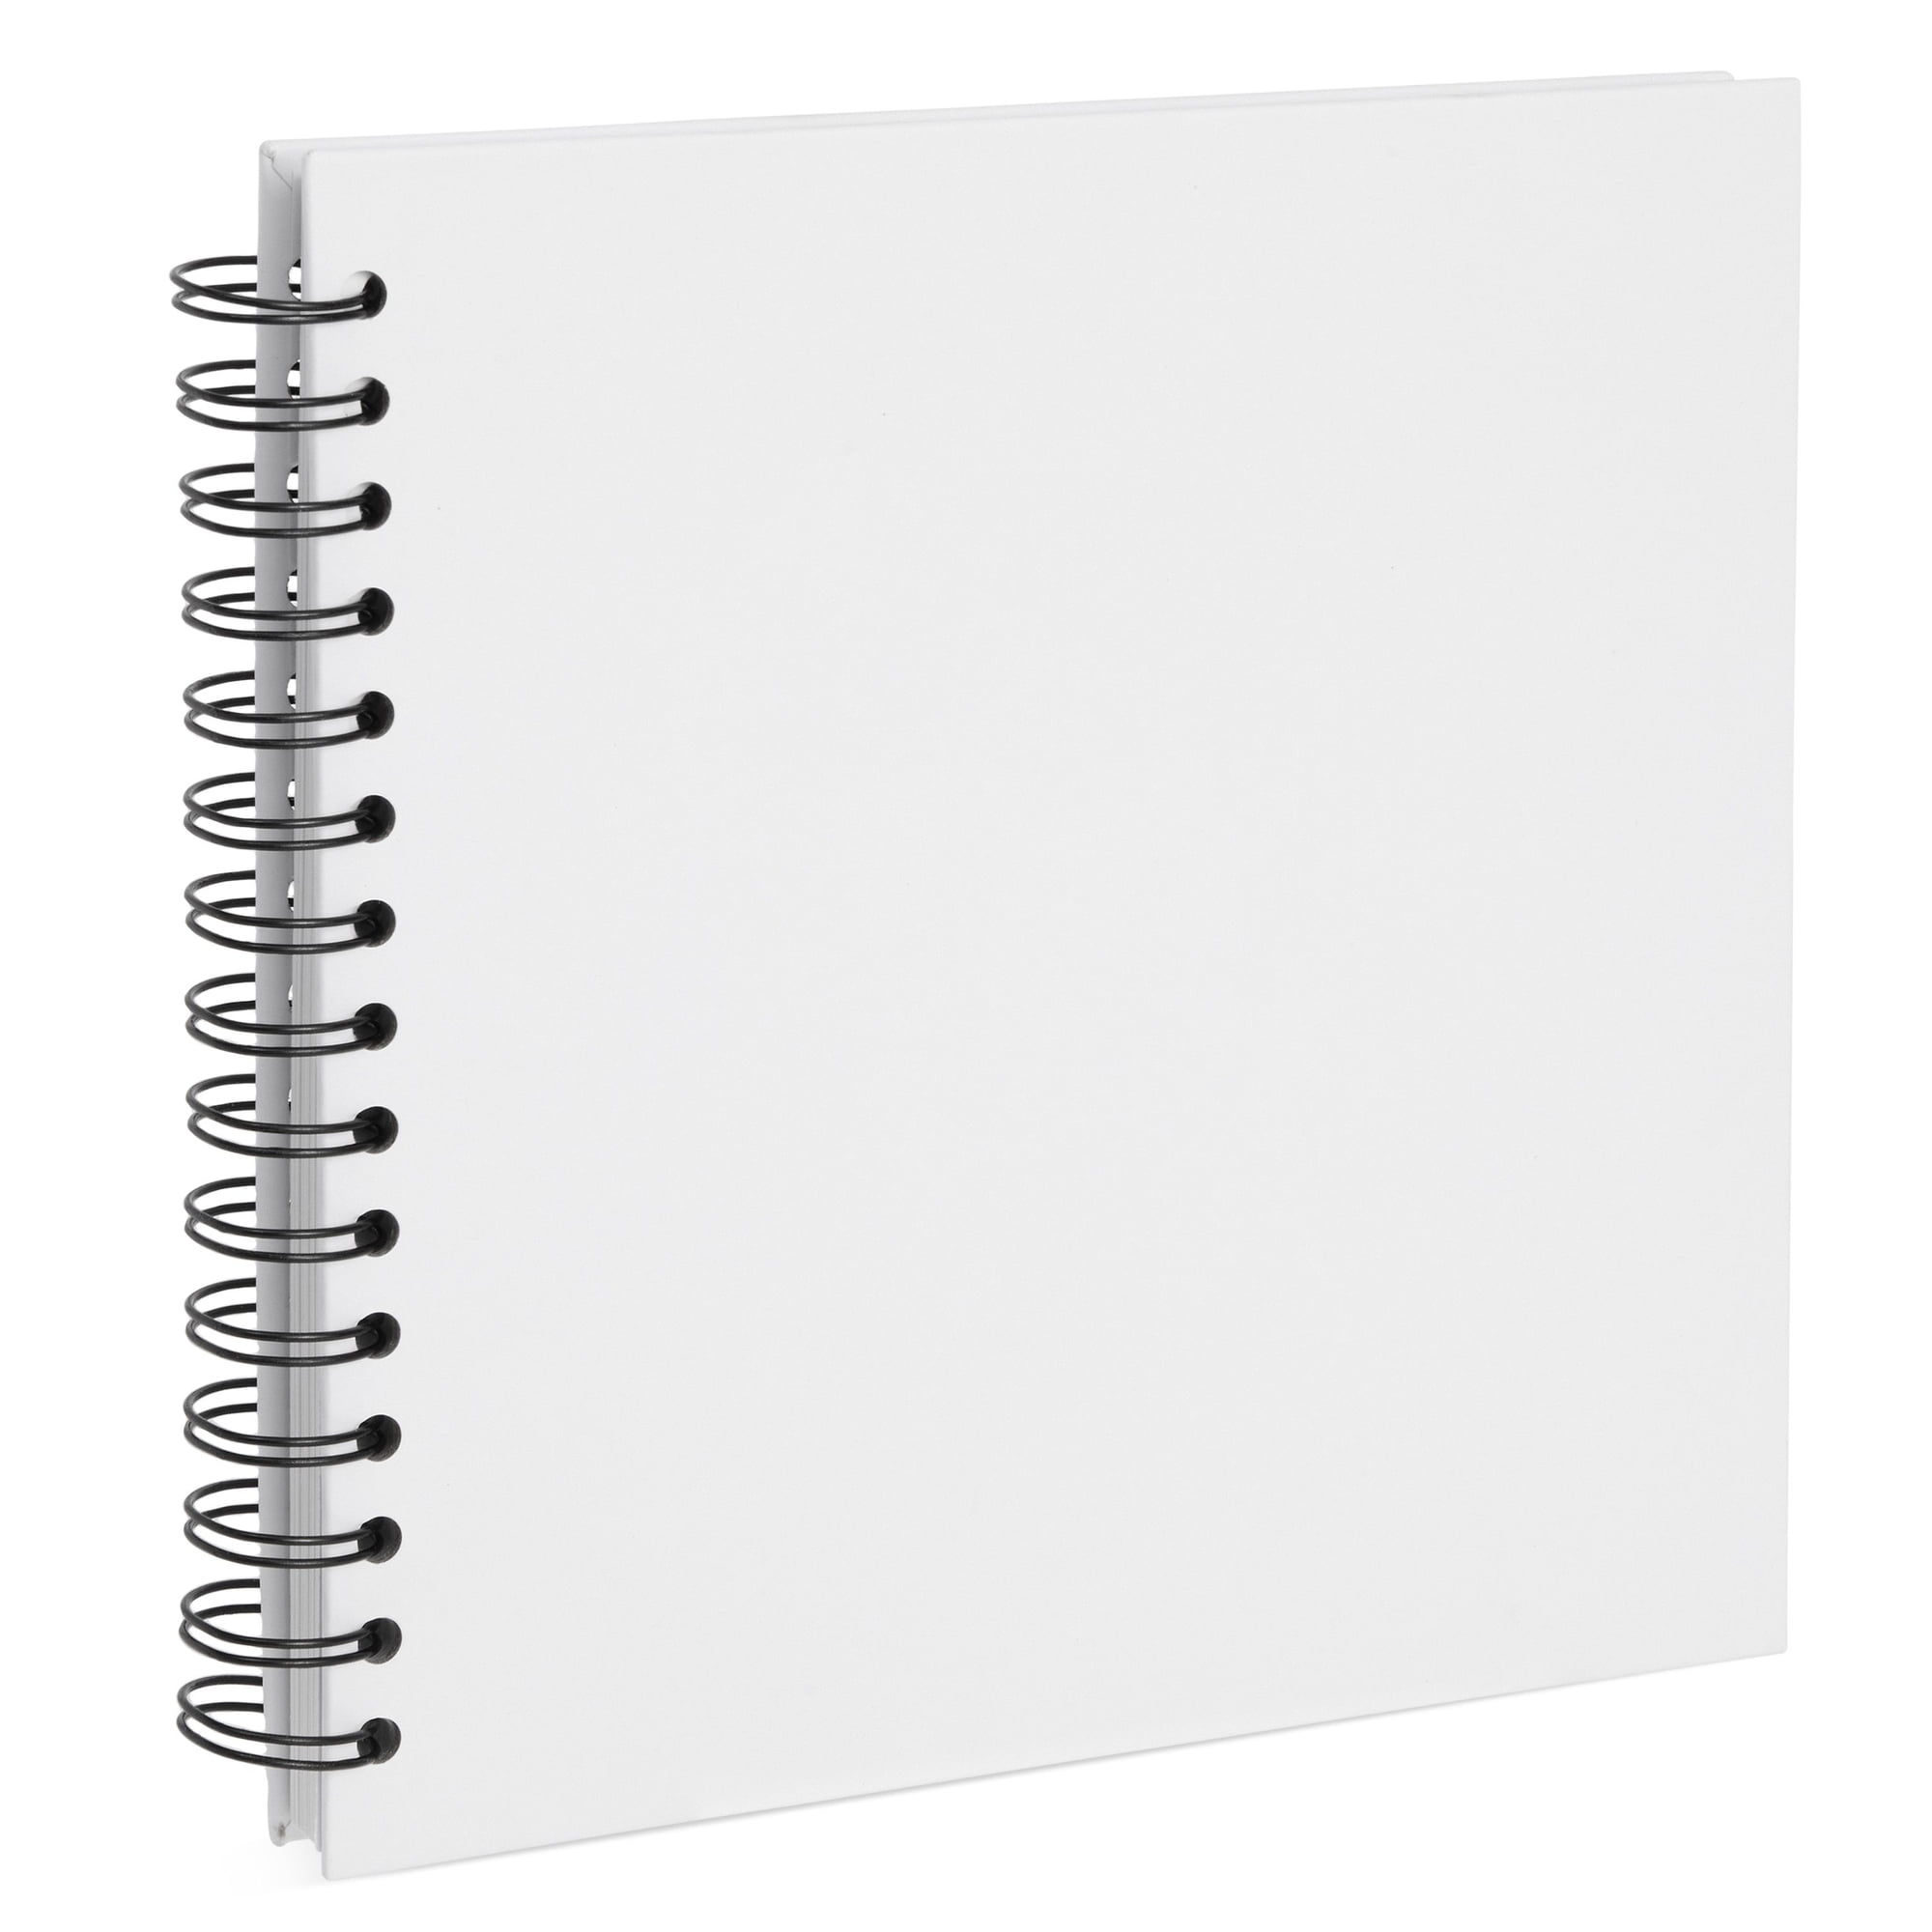 Rayher 8160900 Spiral Bound Scrapbook with Hardcover, Blank Page Album,  Notebook, 30 white Sheets, 21 x 30 cm